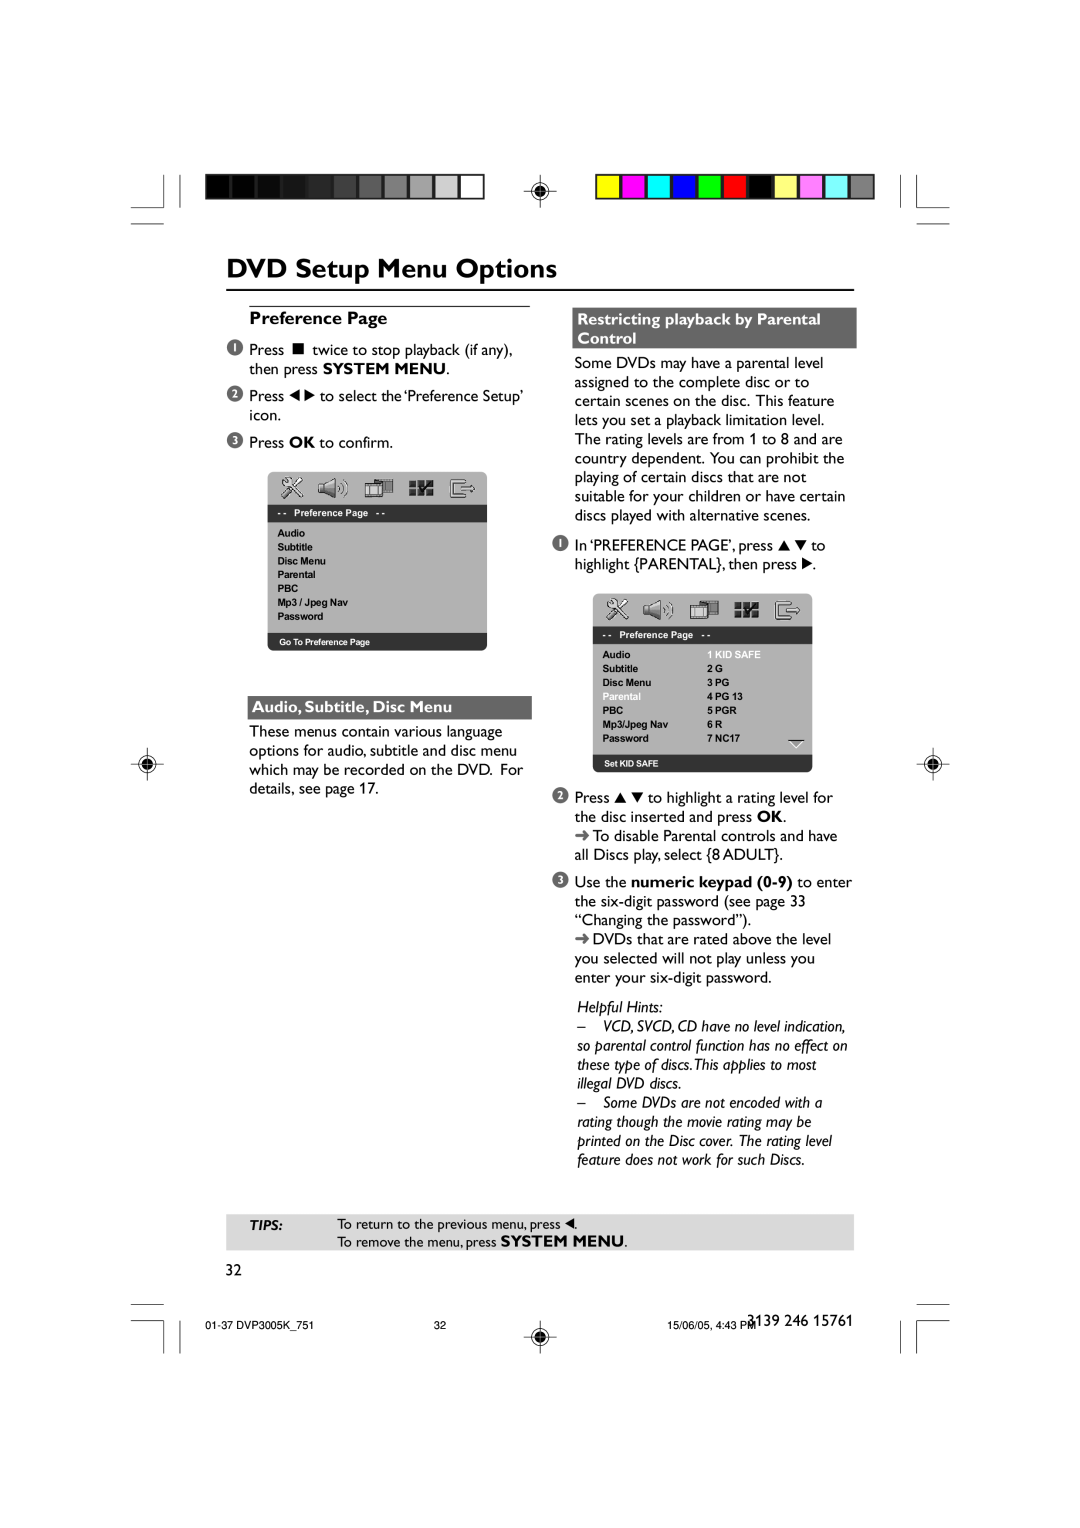 Philips DVP3005K/74 Preference Page, Restricting playback by Parental Control, Audio, Subtitle, Disc Menu, Helpful Hints 